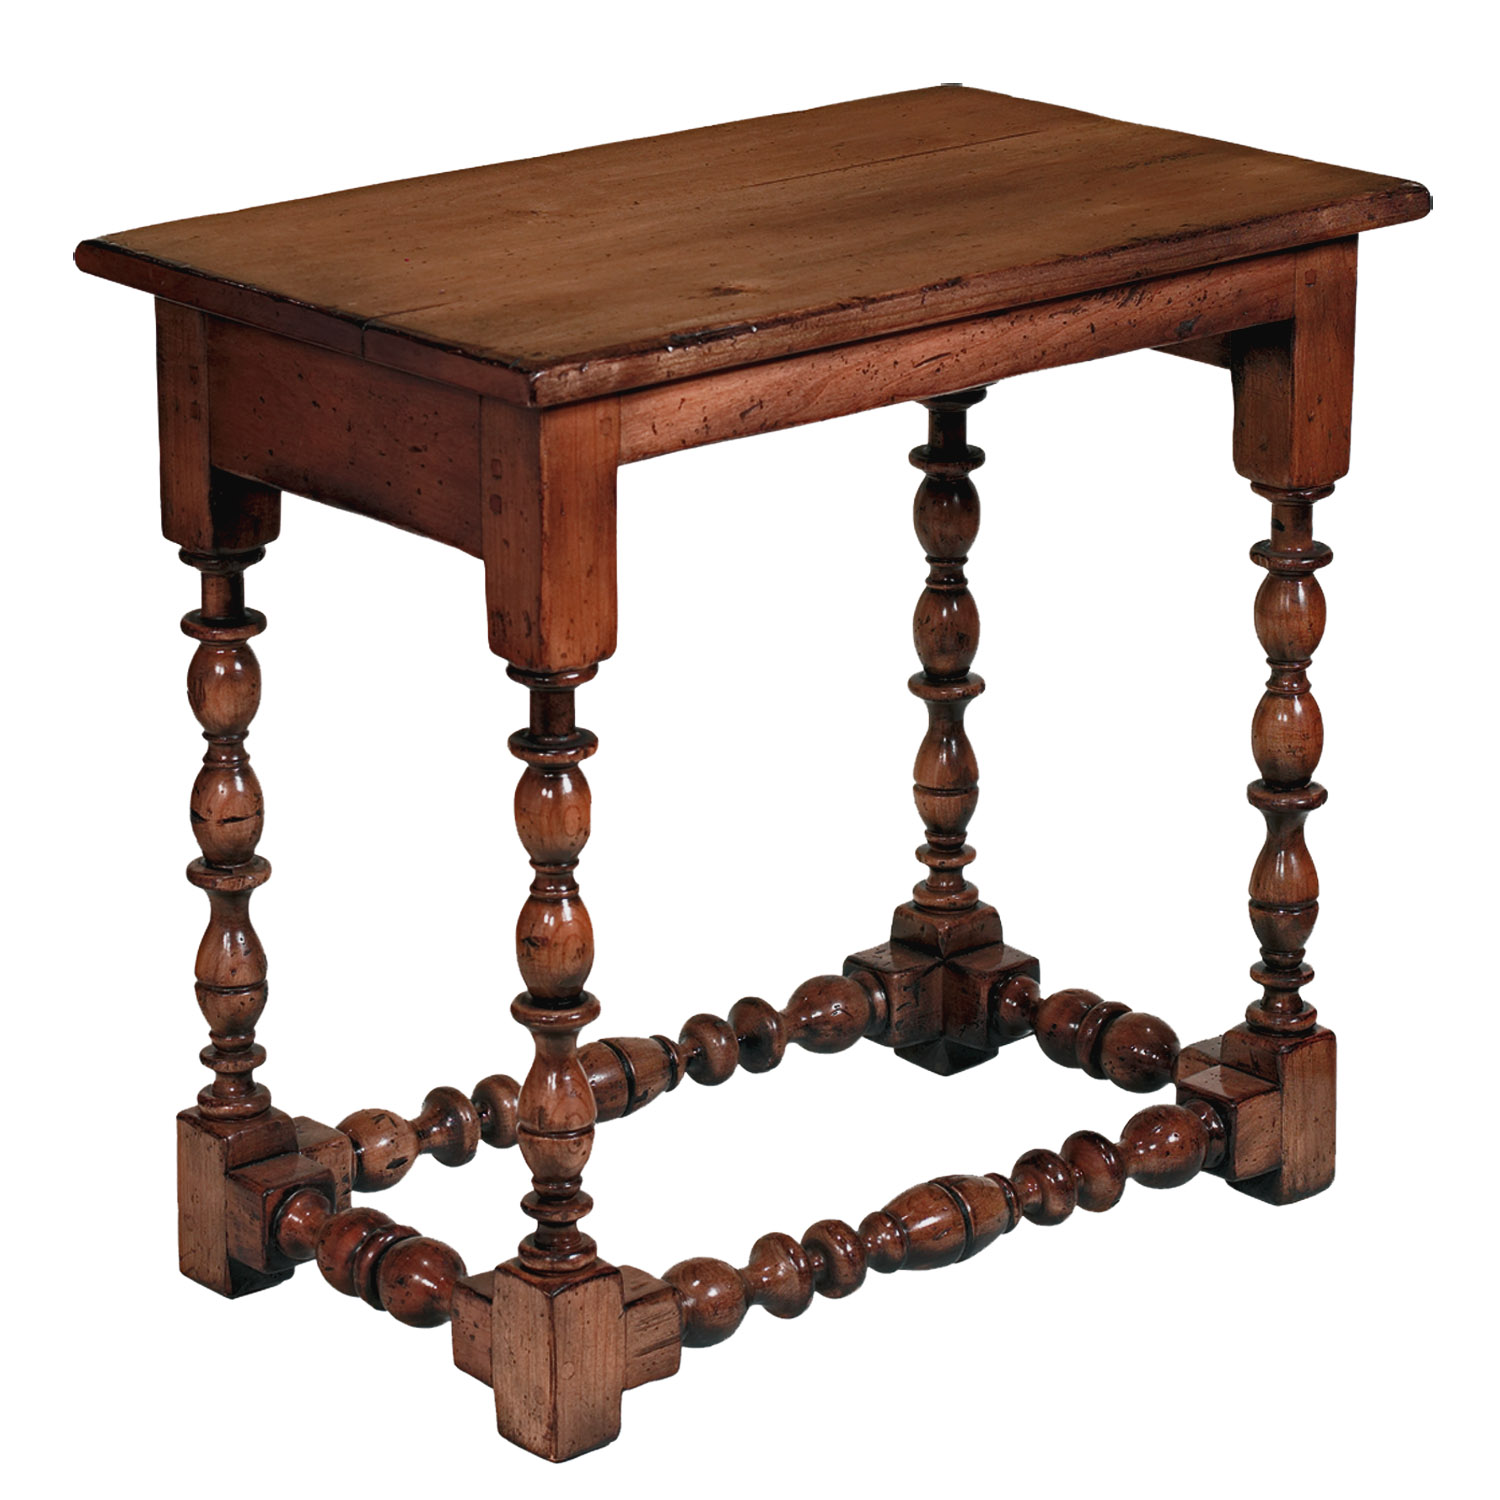 Manfred traditional spindle twist leg end side table by Woodland furniture in Idaho Falls USA